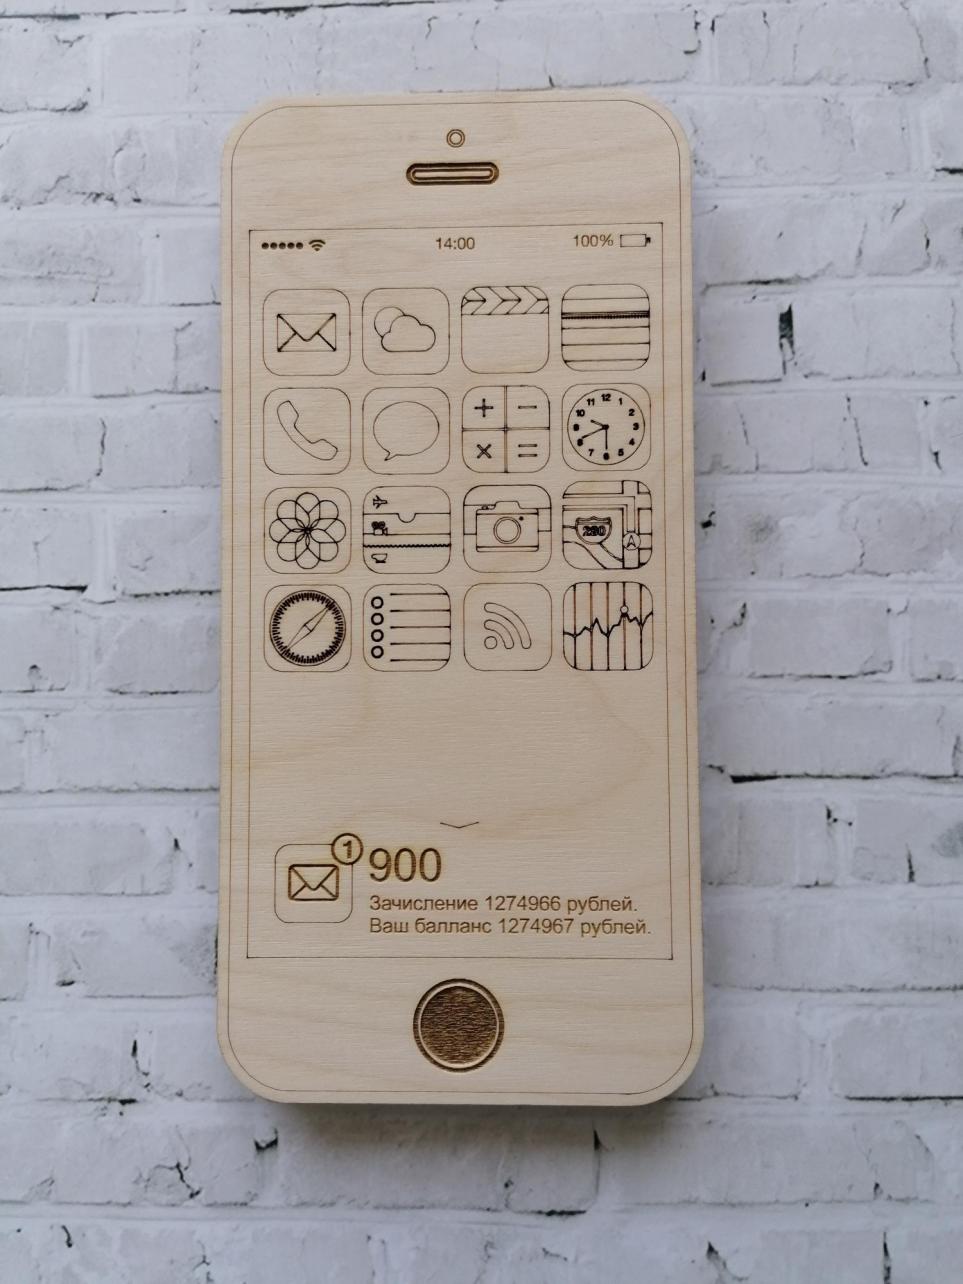 Laser Cut Wooden Wallet Banknotes Box iPhone Shaped Free Vector